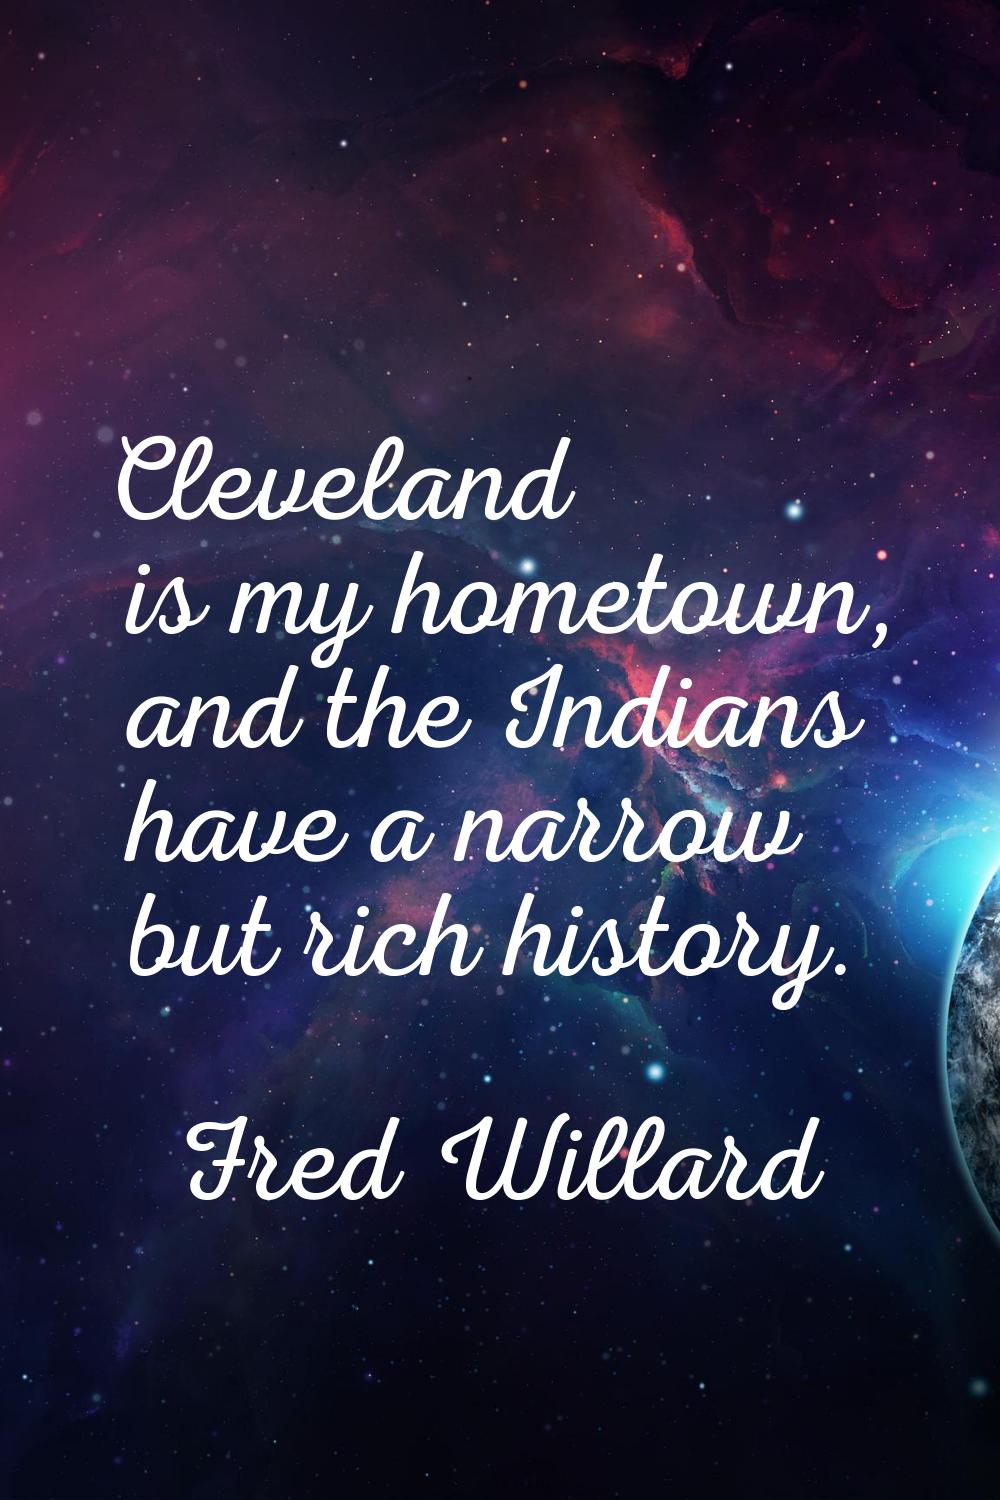 Cleveland is my hometown, and the Indians have a narrow but rich history.